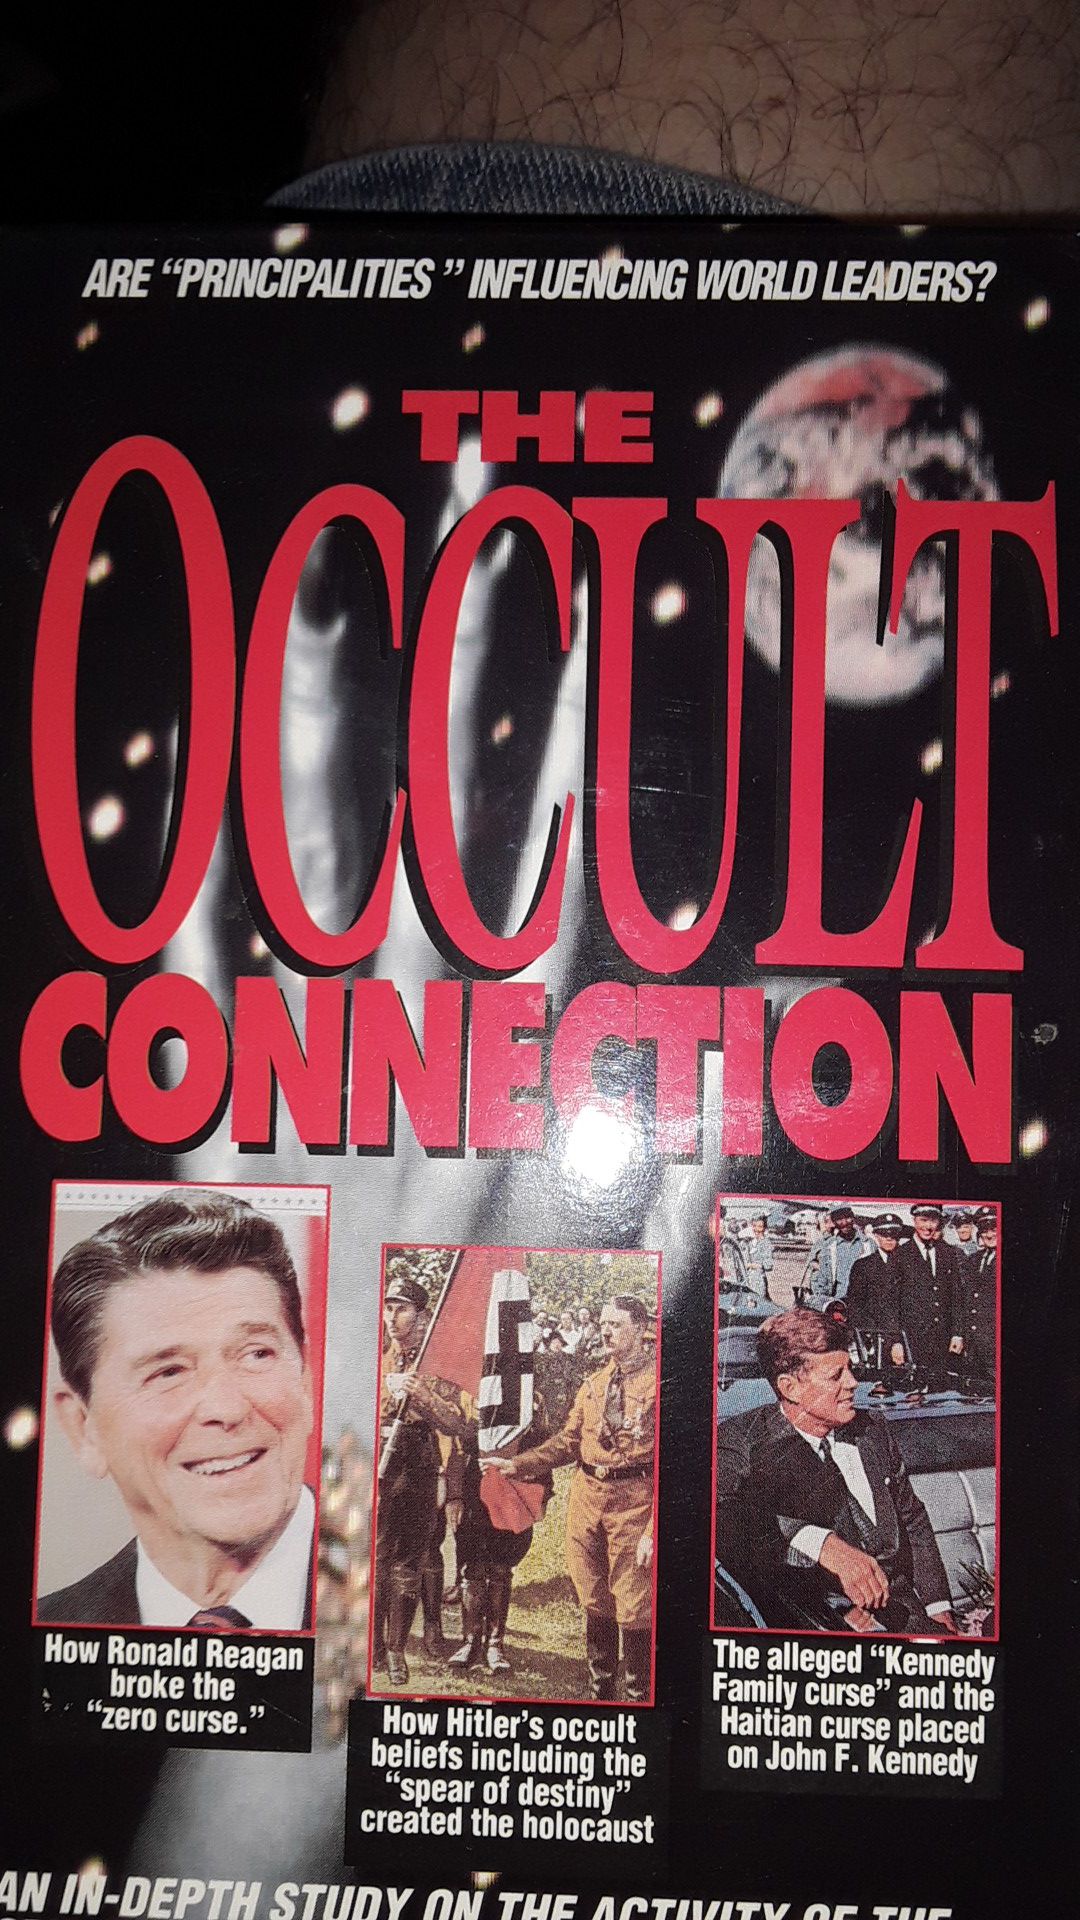 The Occoult connection vhs